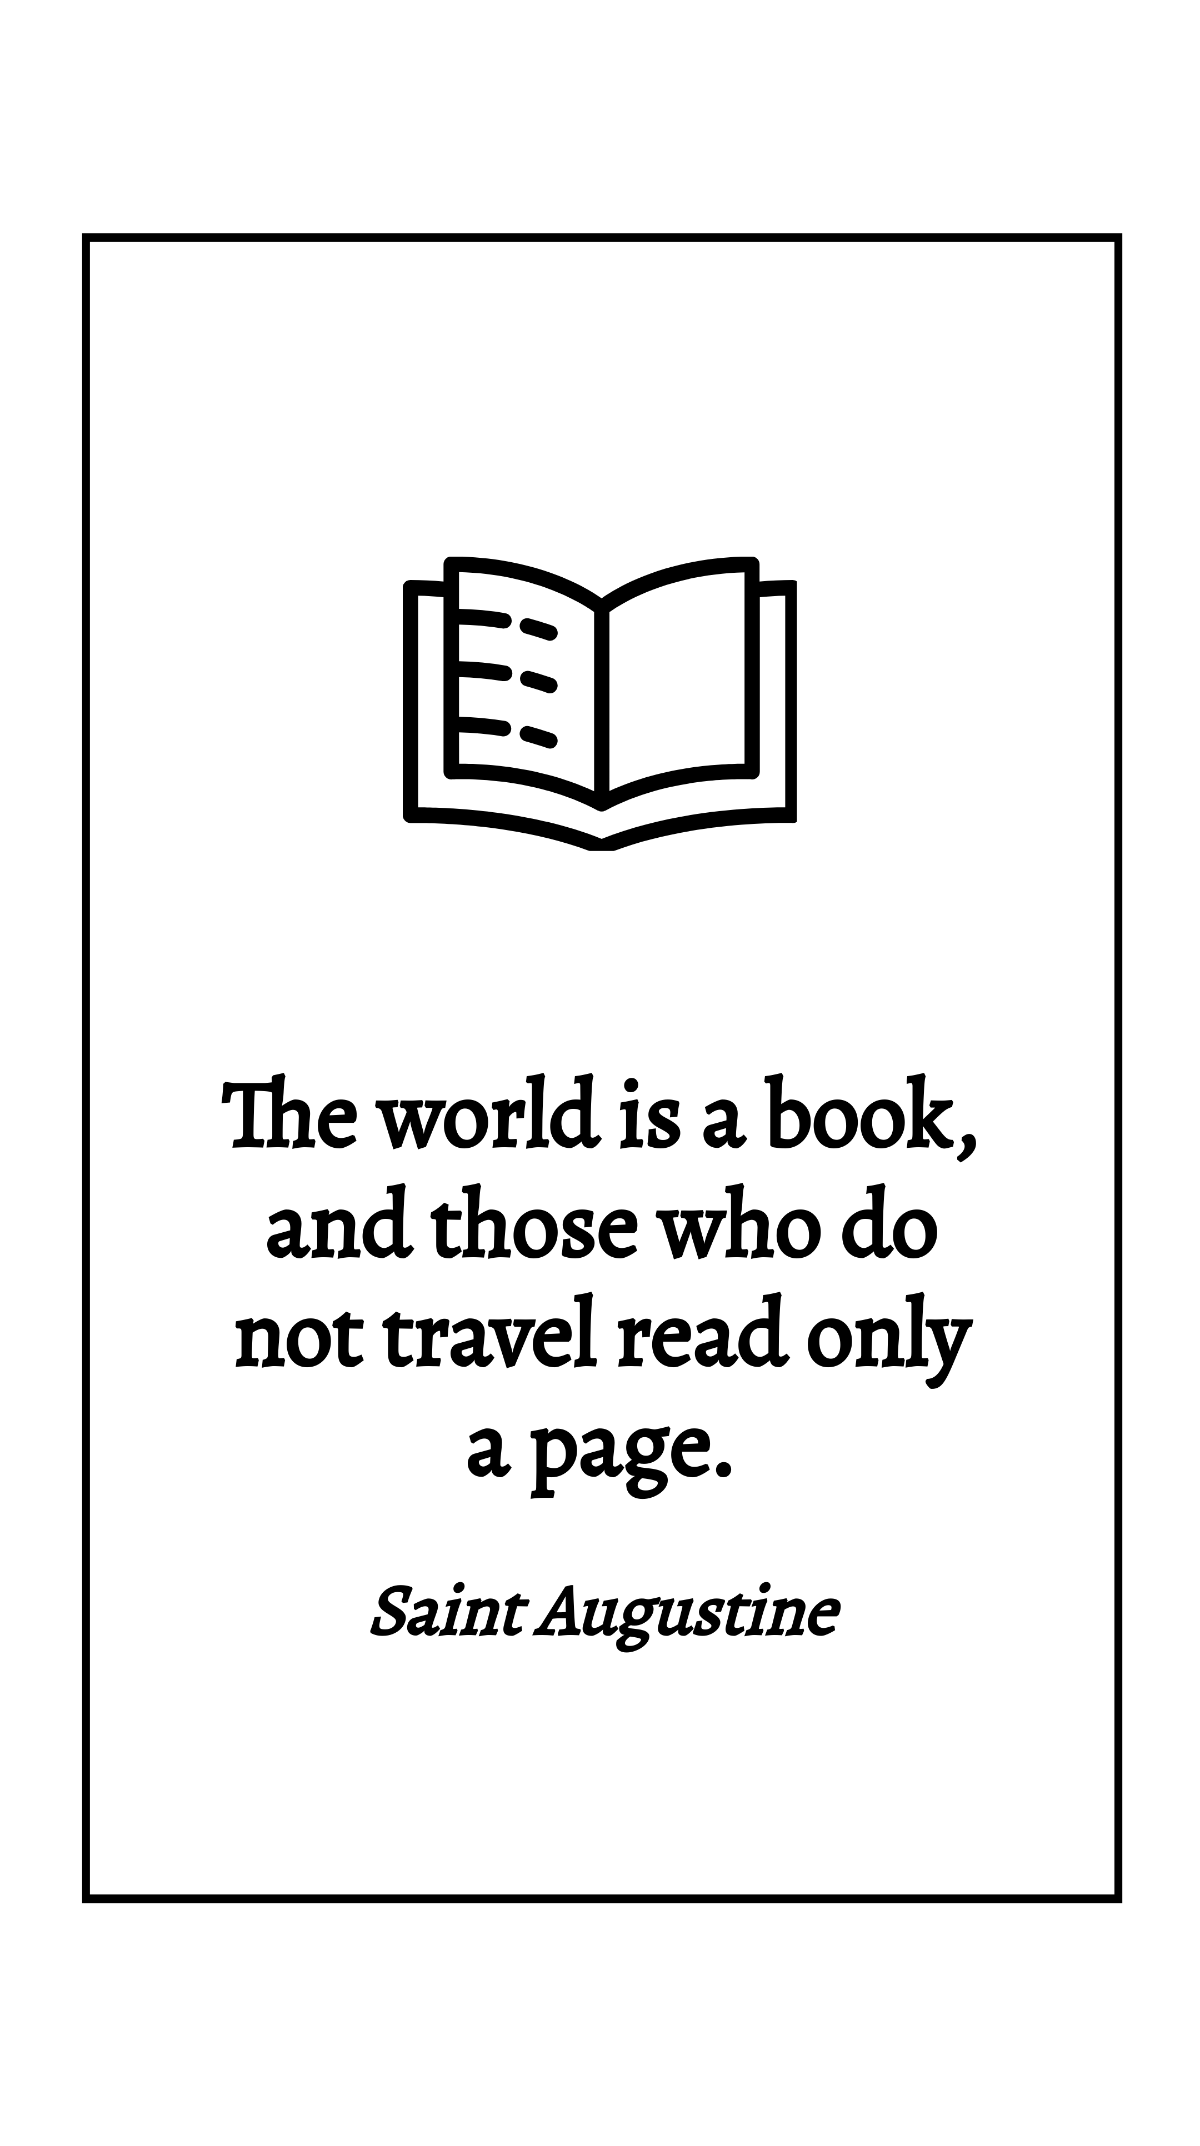 Saint Augustine - The world is a book, and those who do not travel read only a page. Template